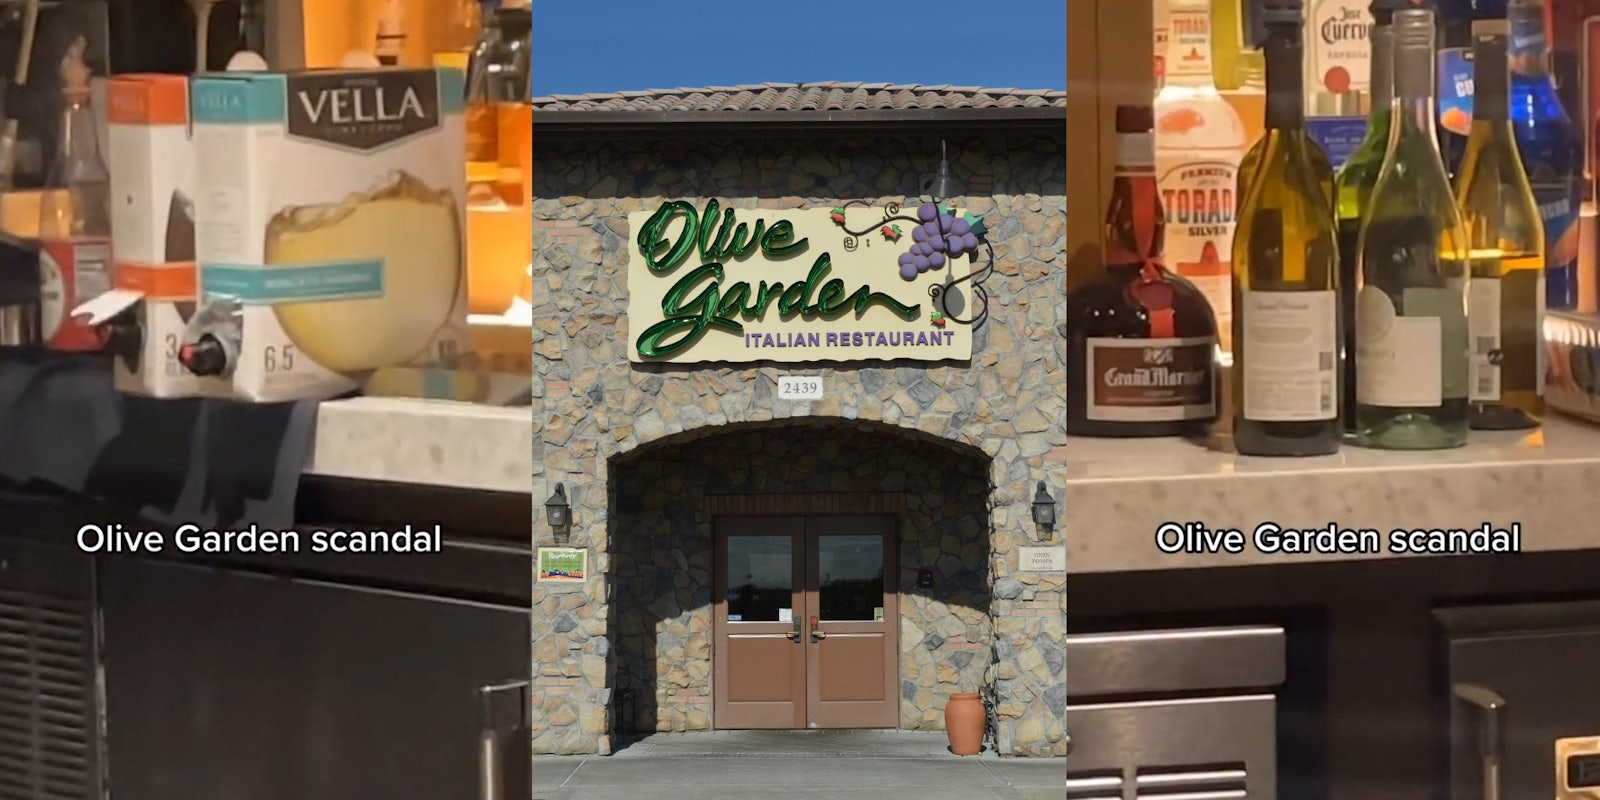 Olive Garden interior with boxed wine and caption 'Olive Garden scandal' (l) Olive Garden building with sign and blue sky (c) Olive Garden interior with wine and caption 'Olive Garden scandal' (r)